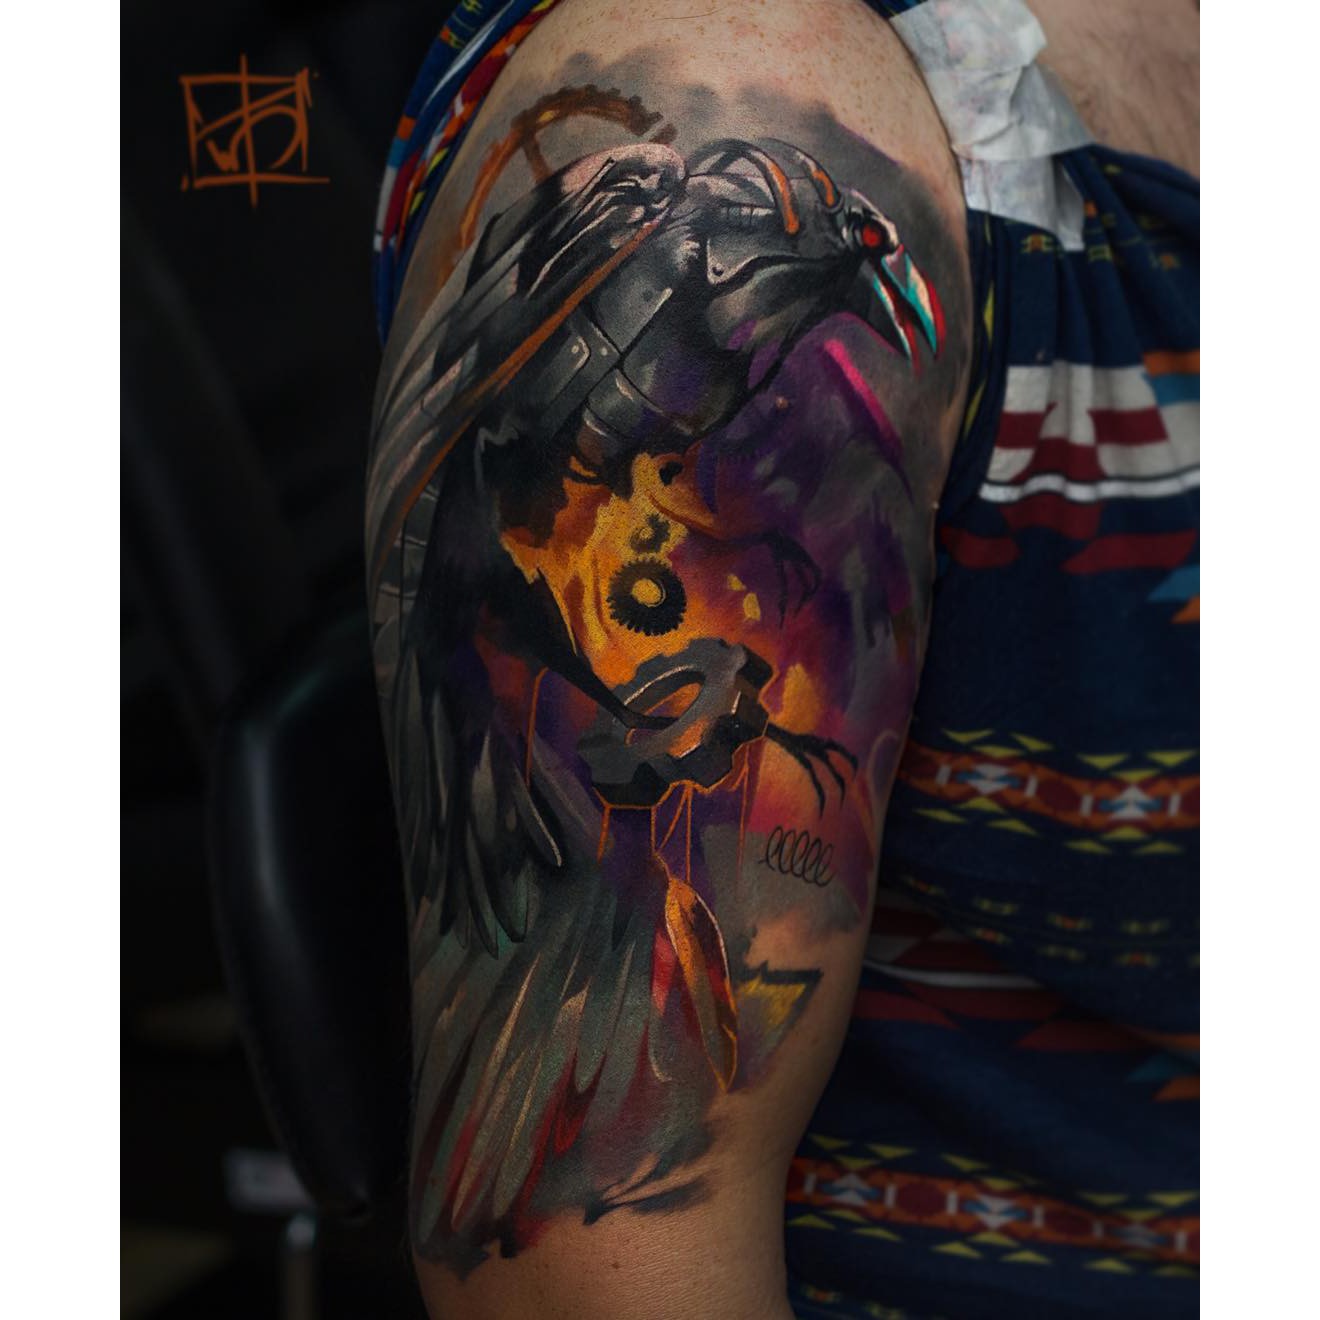 Tymur Denysenko Tattoo- Find the best tattoo artists, anywhere in the world.